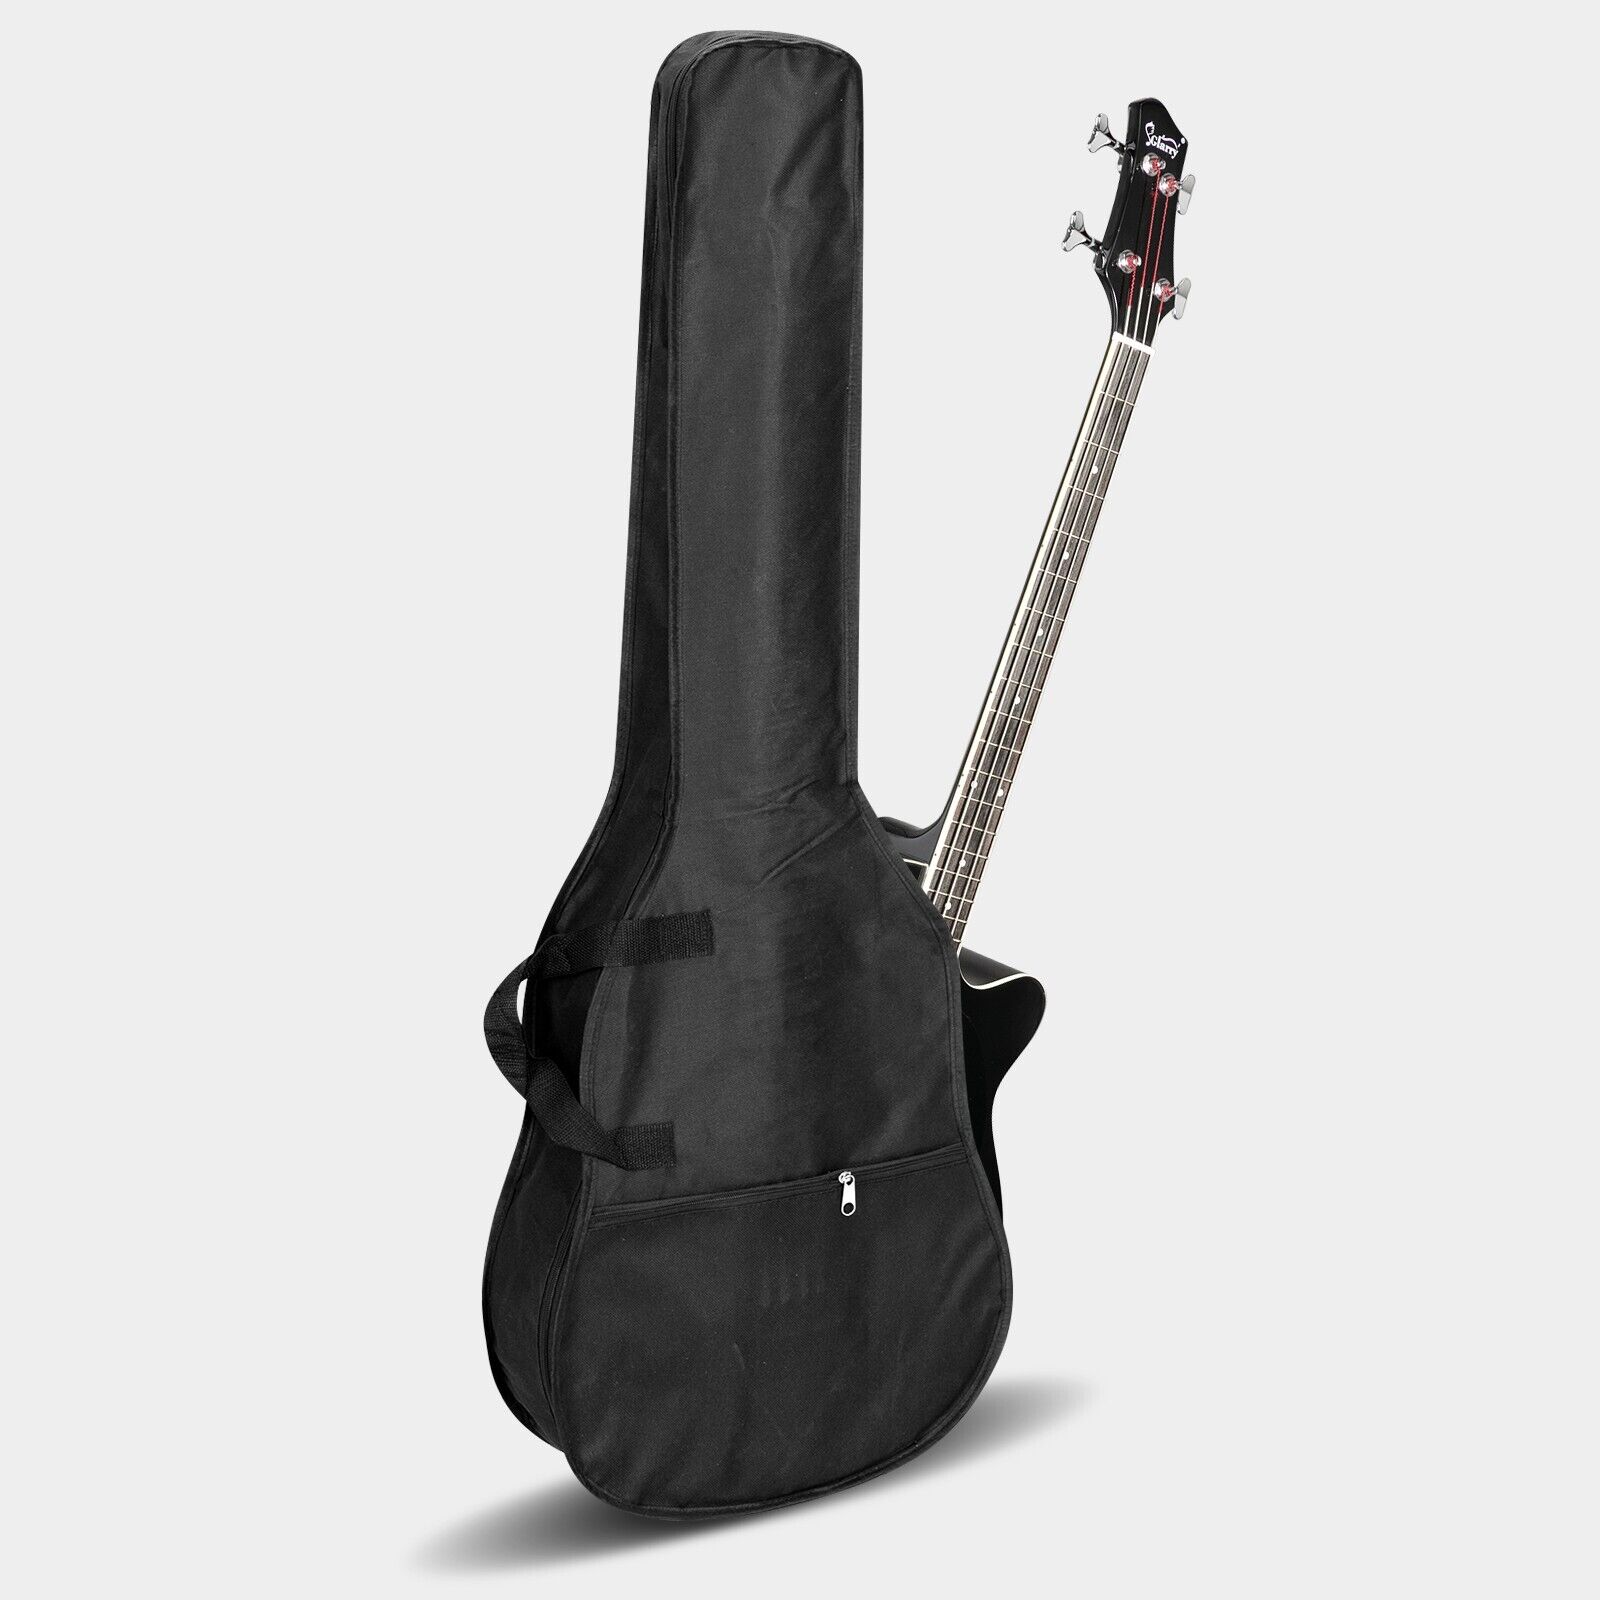 Glarry GMB101 Black 4 string Electric Acoustic Bass Guitar w/ 4-Band Equalizer 12